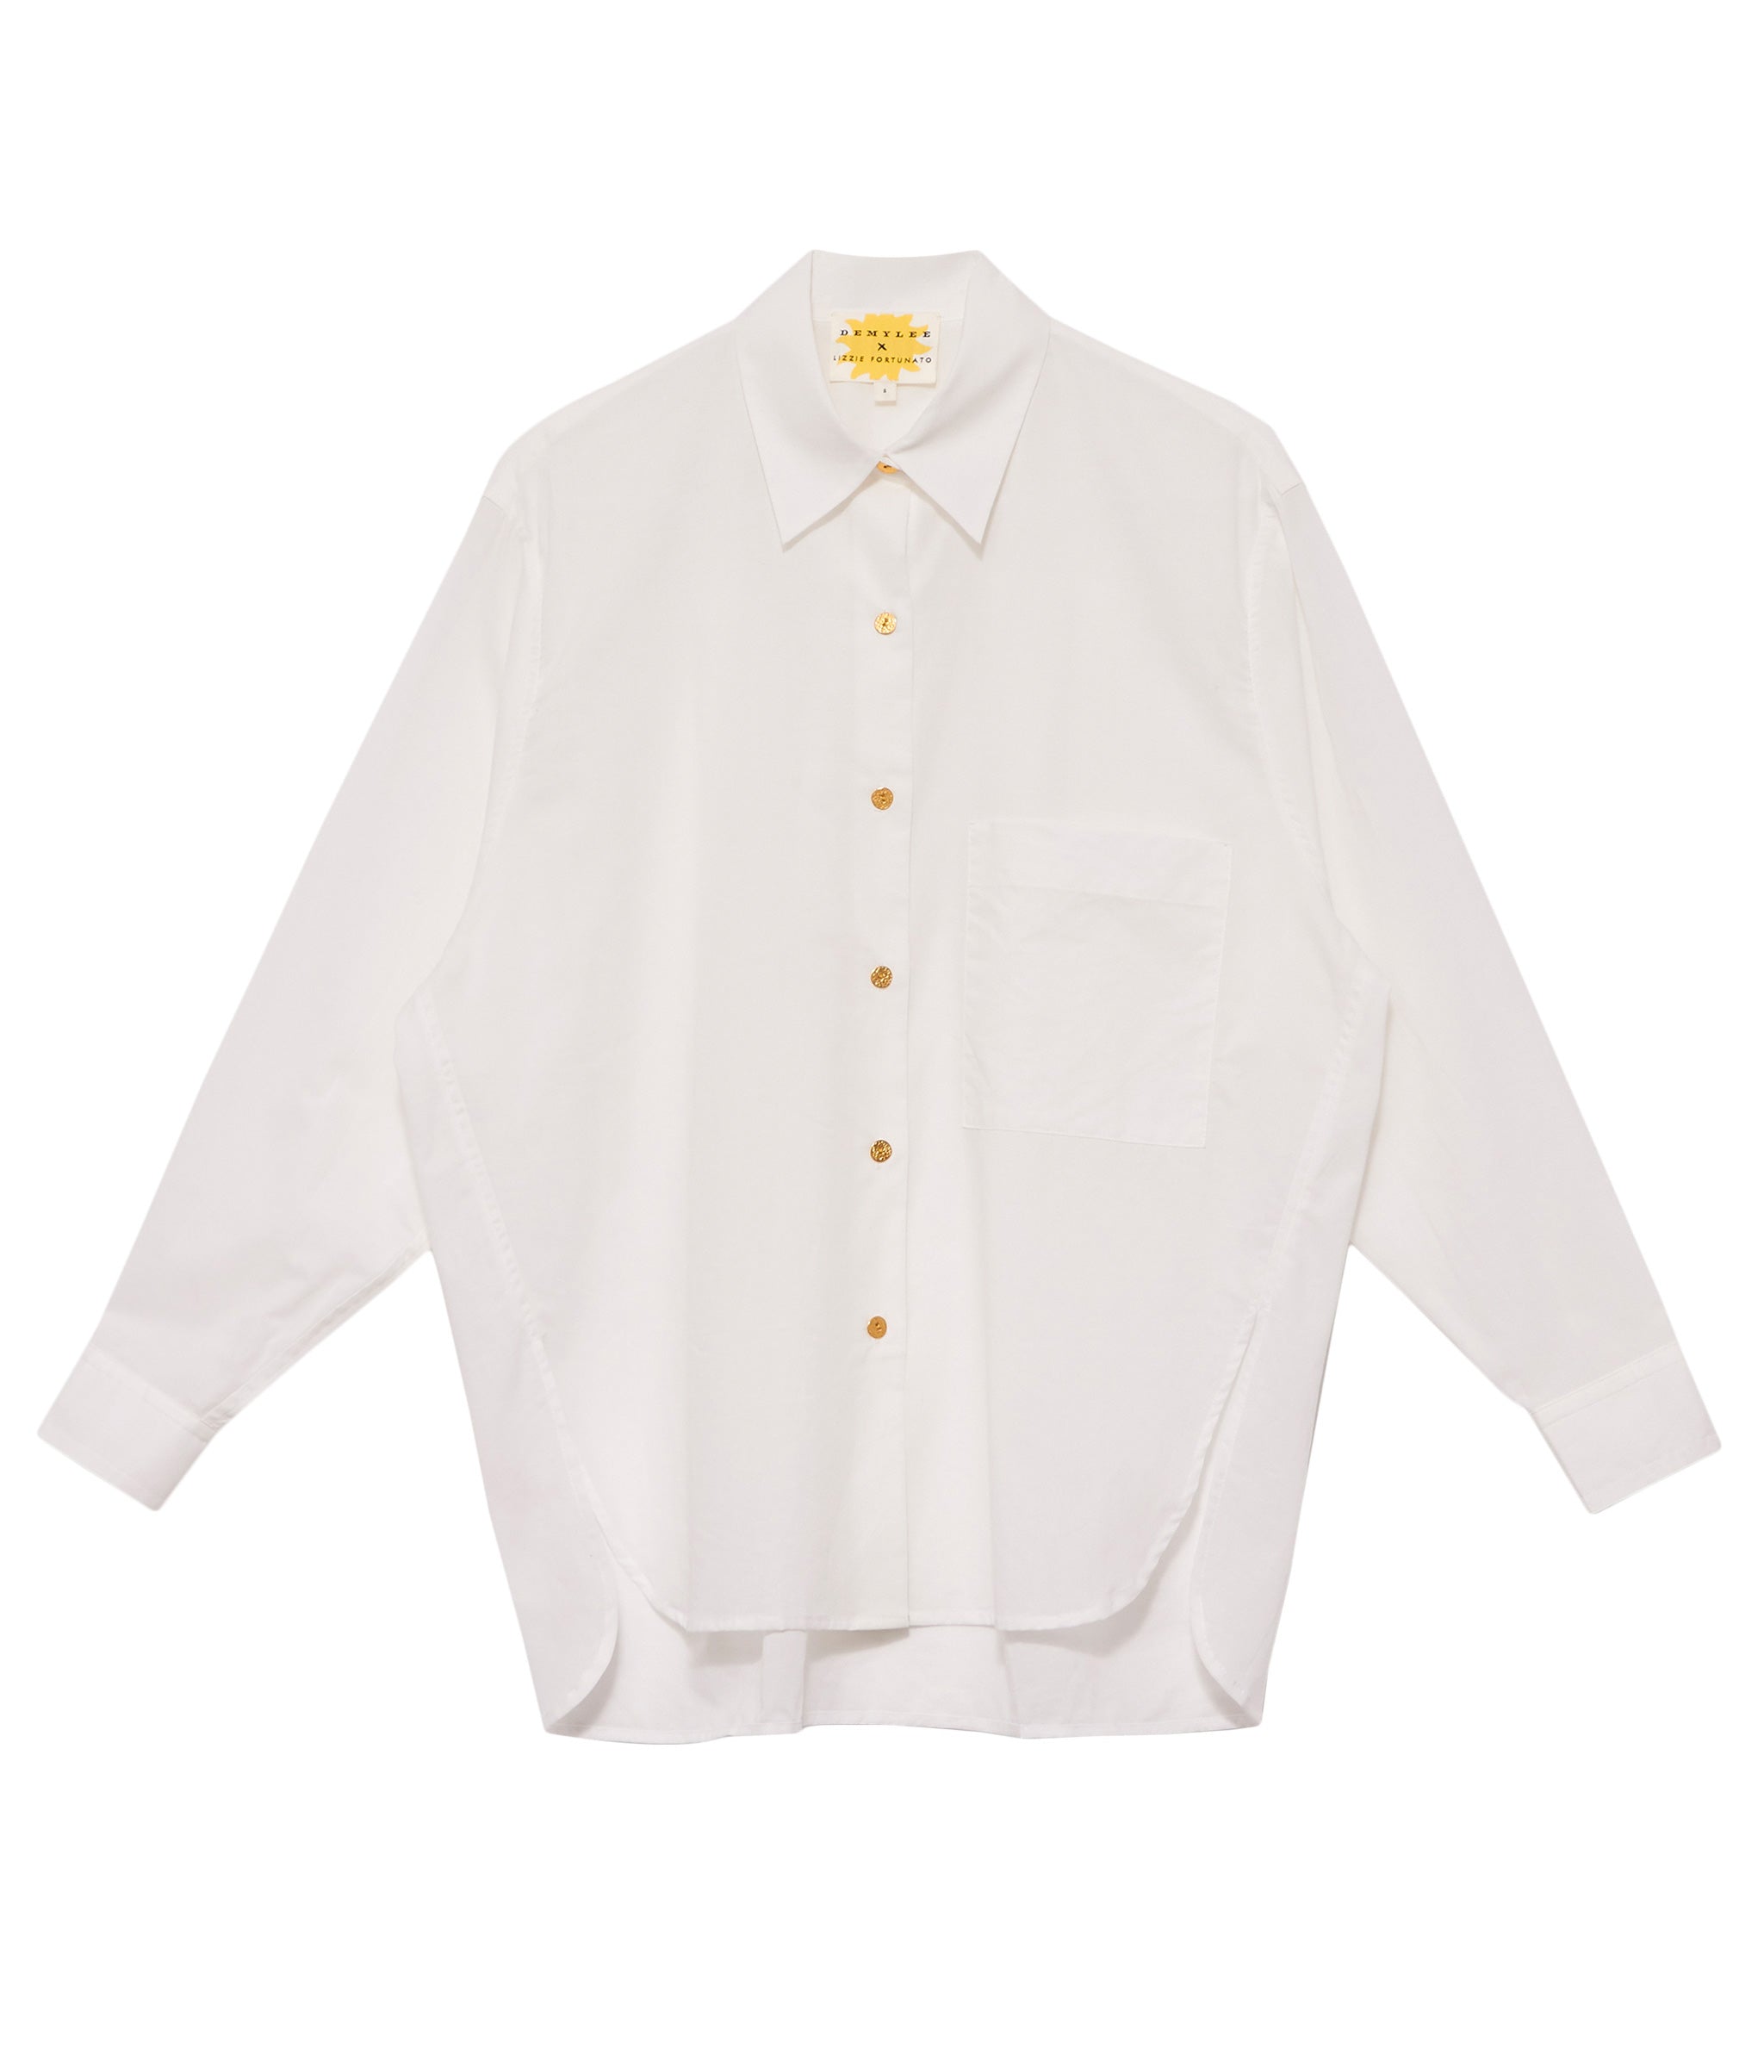 Set The Scene Shirt. Clothing collaboration with DemyLee. Off-White cotton voile shirt with gold metal buttons.